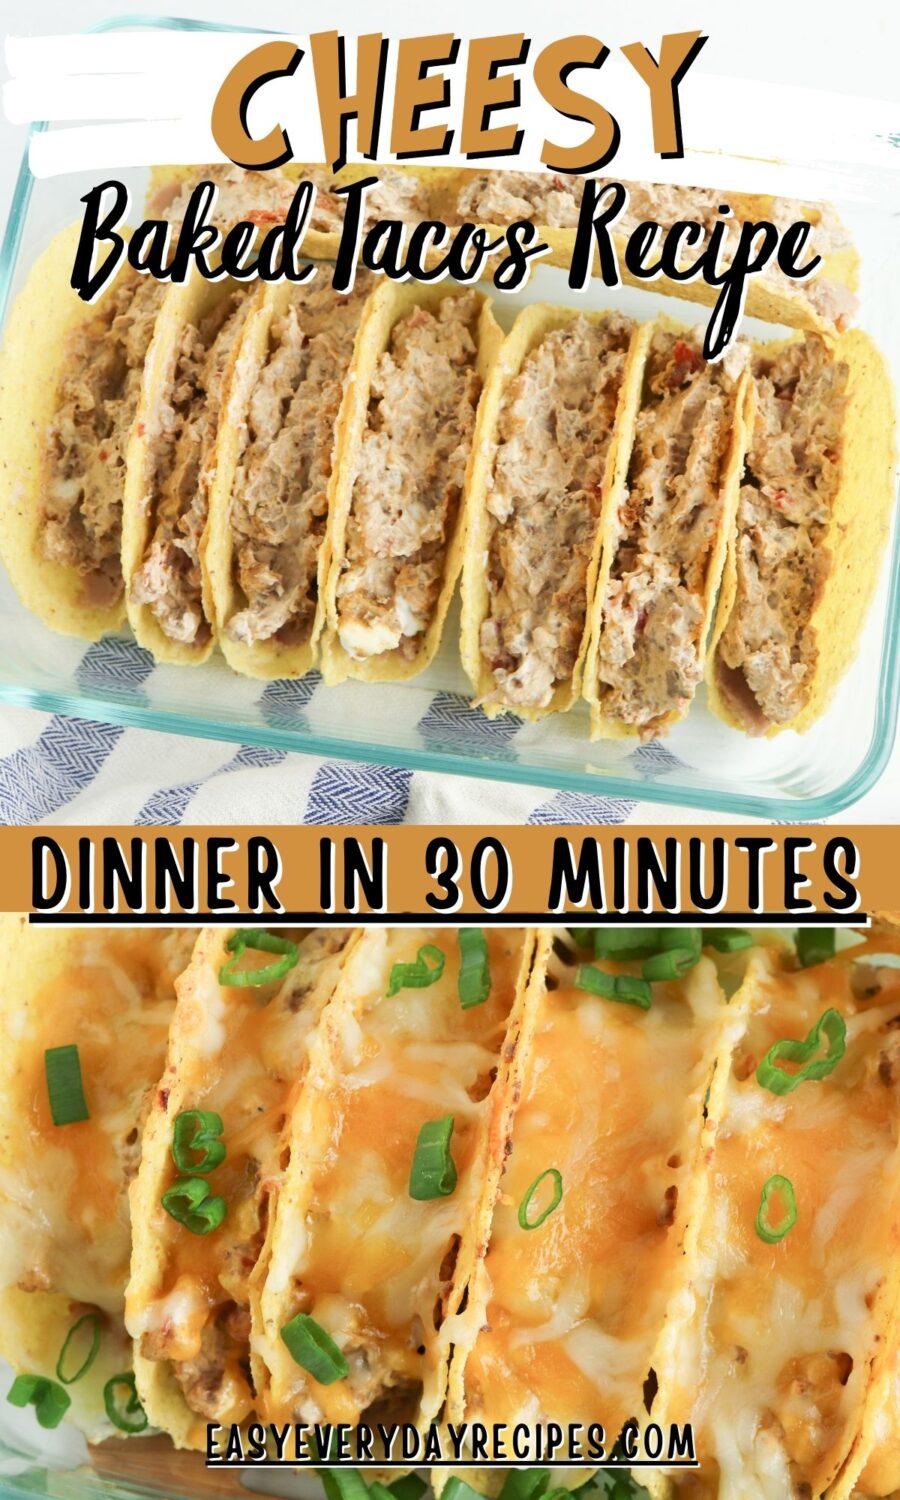 Cheesy baked tacos recipe for a delicious and easy-to-make meal.